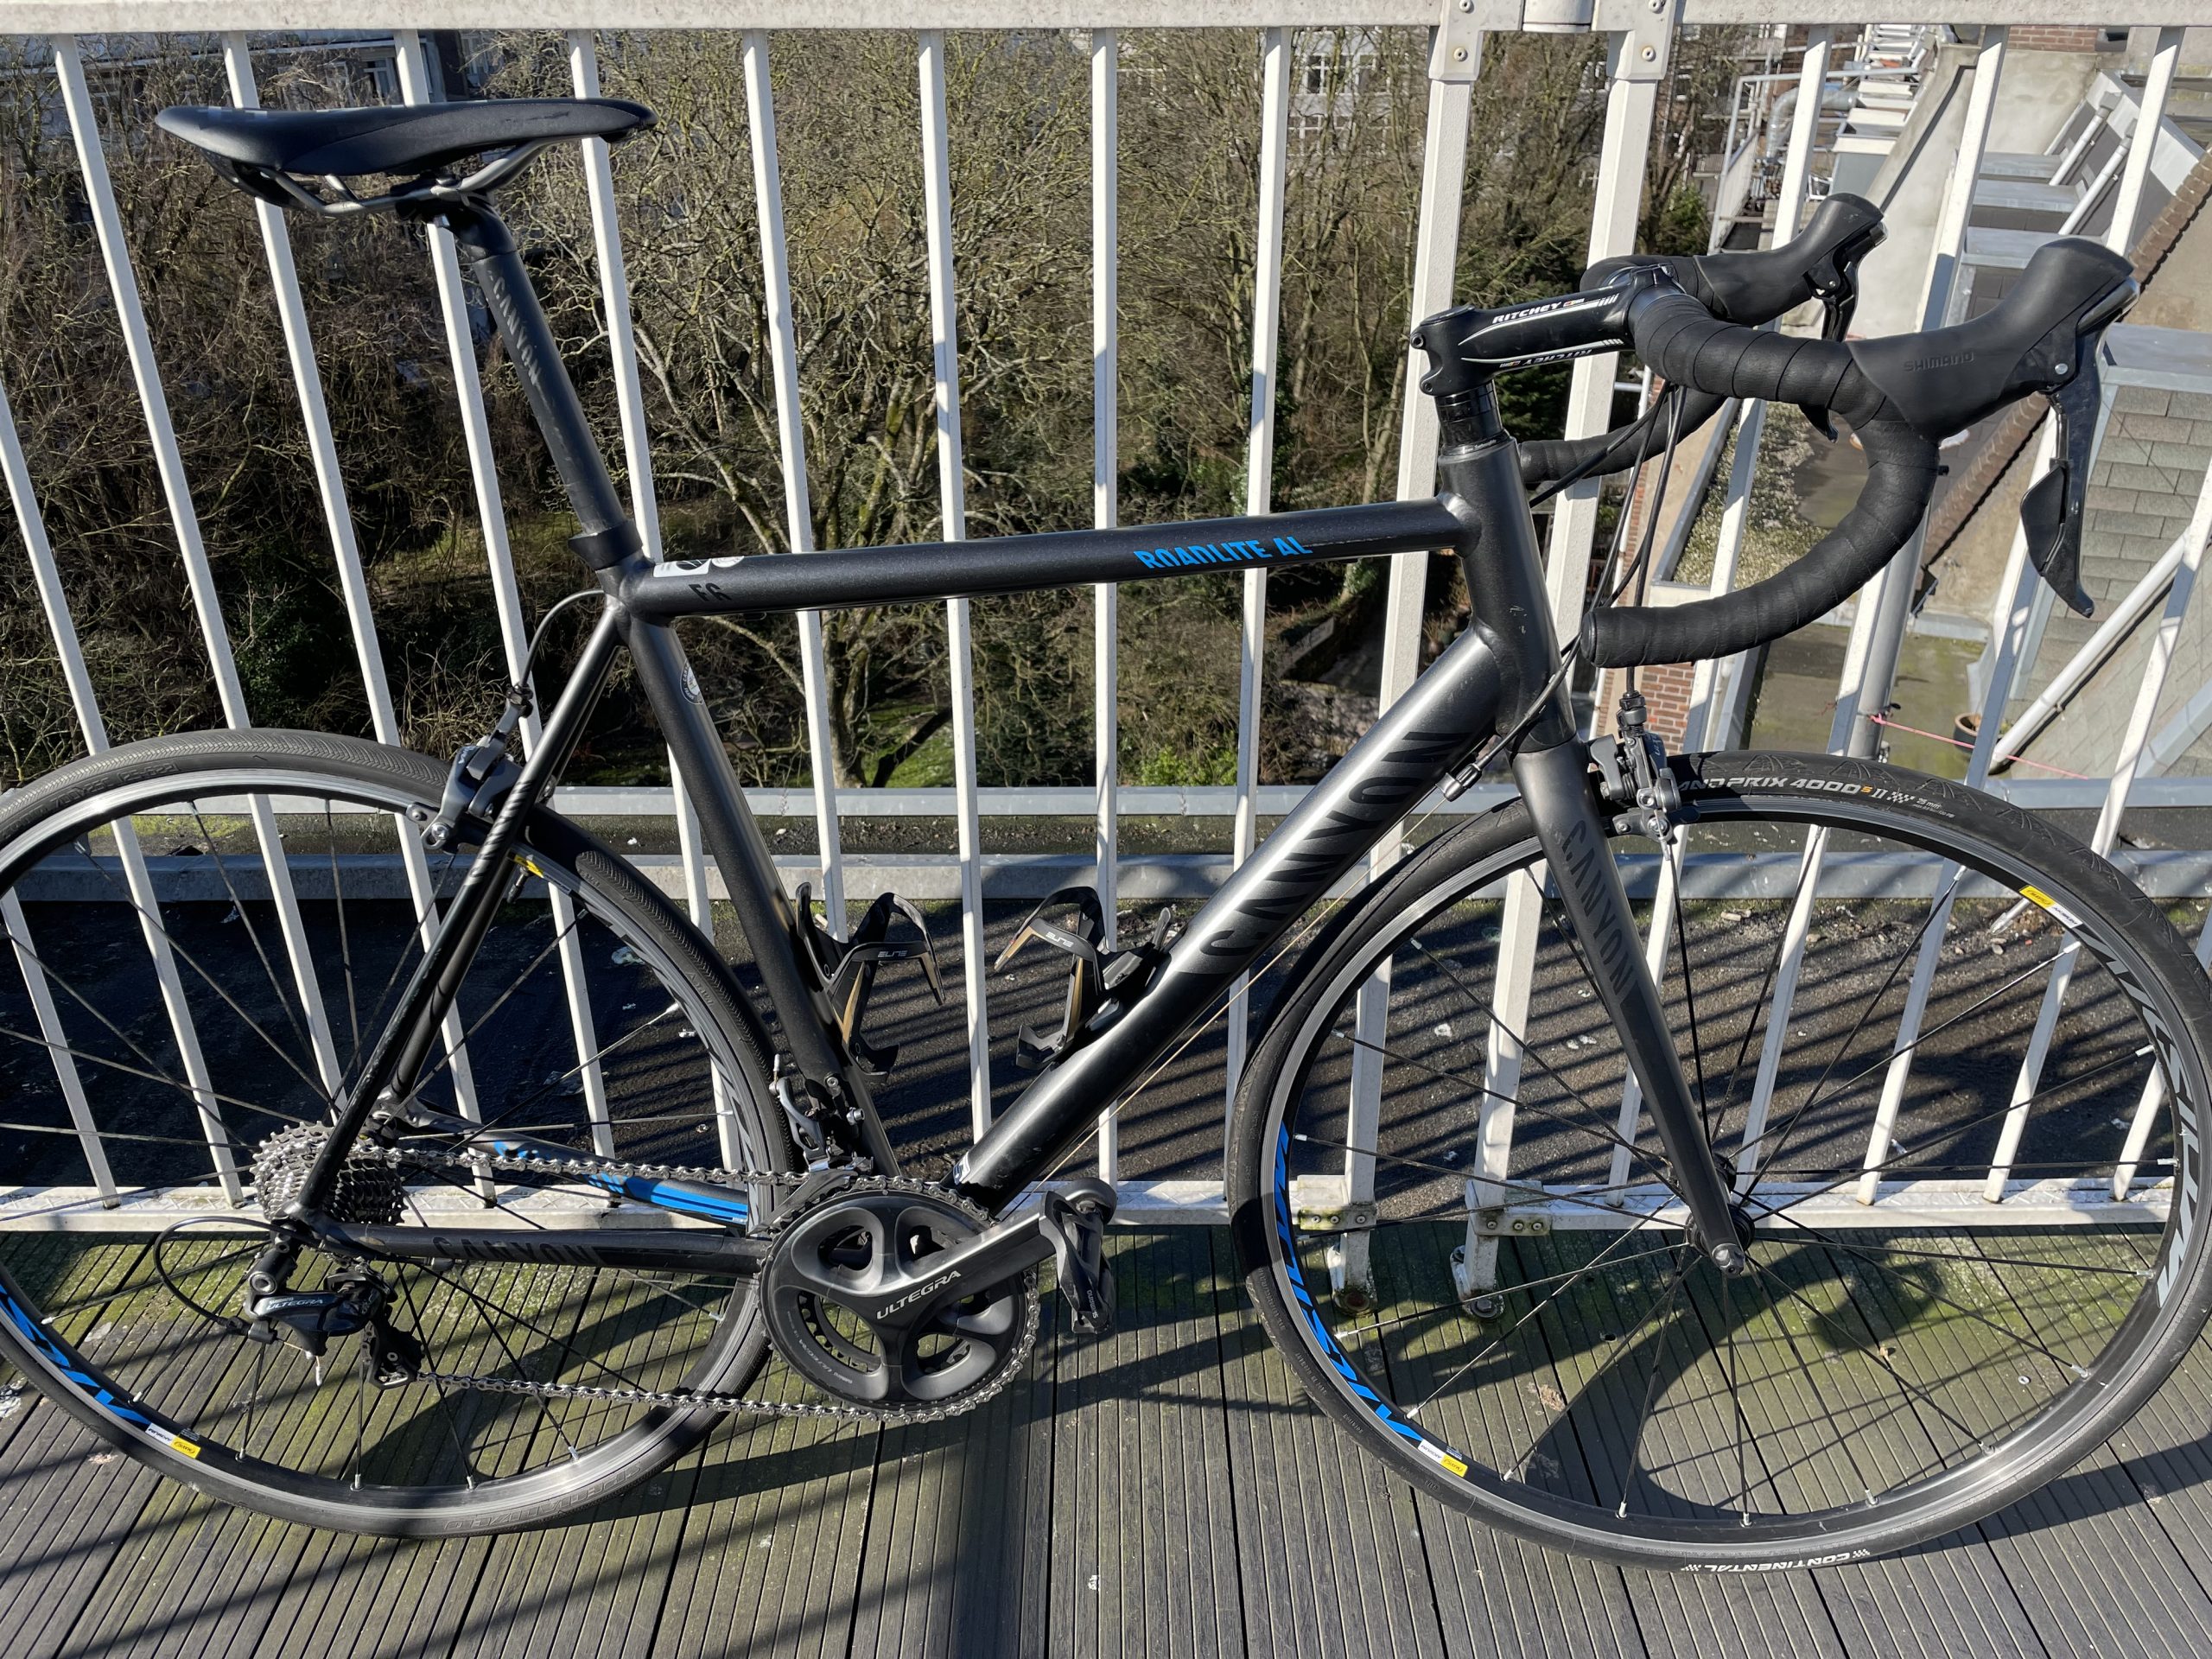 diefstal Aanklager architect Canyon Roadlite 7.0 shimano ultegra maat 59 - VeloScout